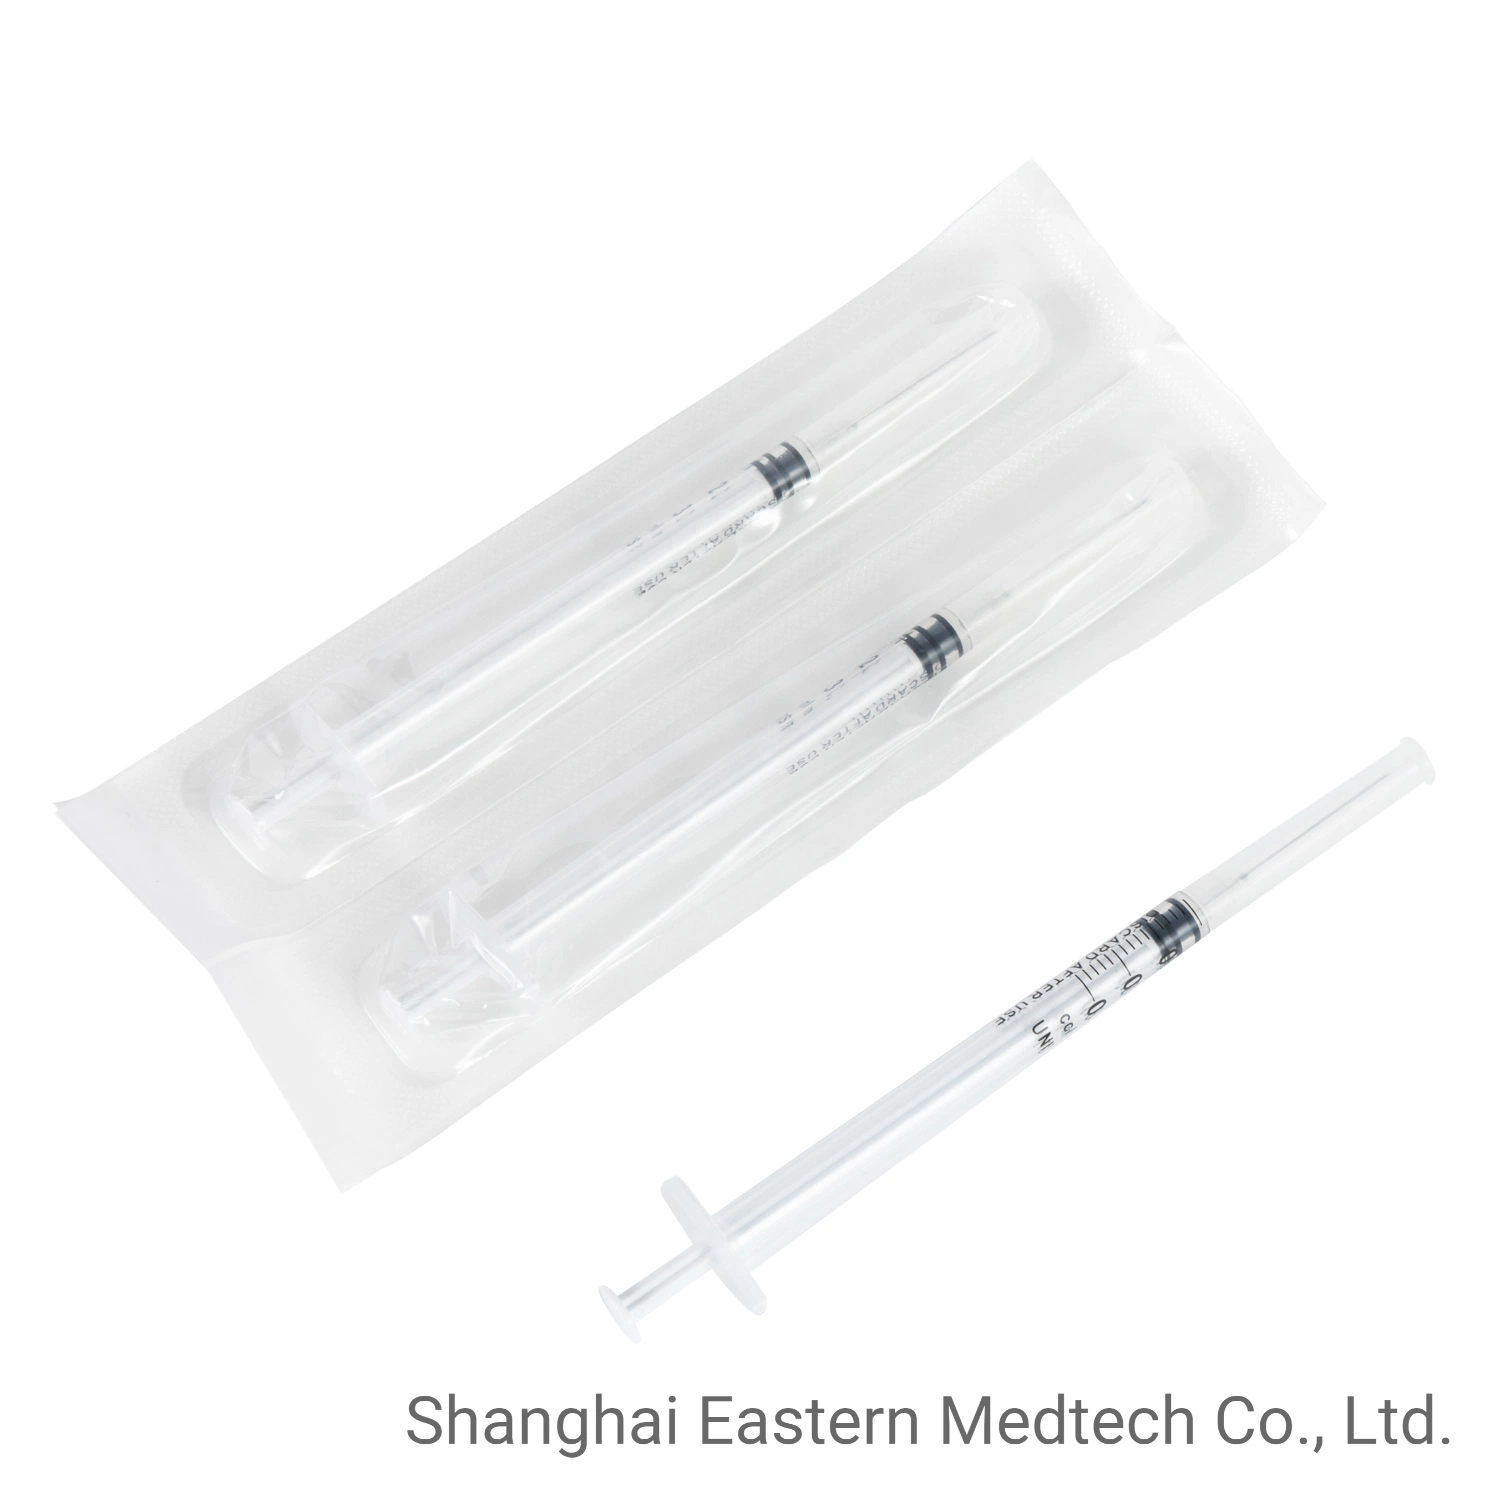 Hospital Equipment Disposable Medical Products, Latex Free, for Single Use, CE Marked Fixed Needle 1ml 25g, Vaccine Syringe